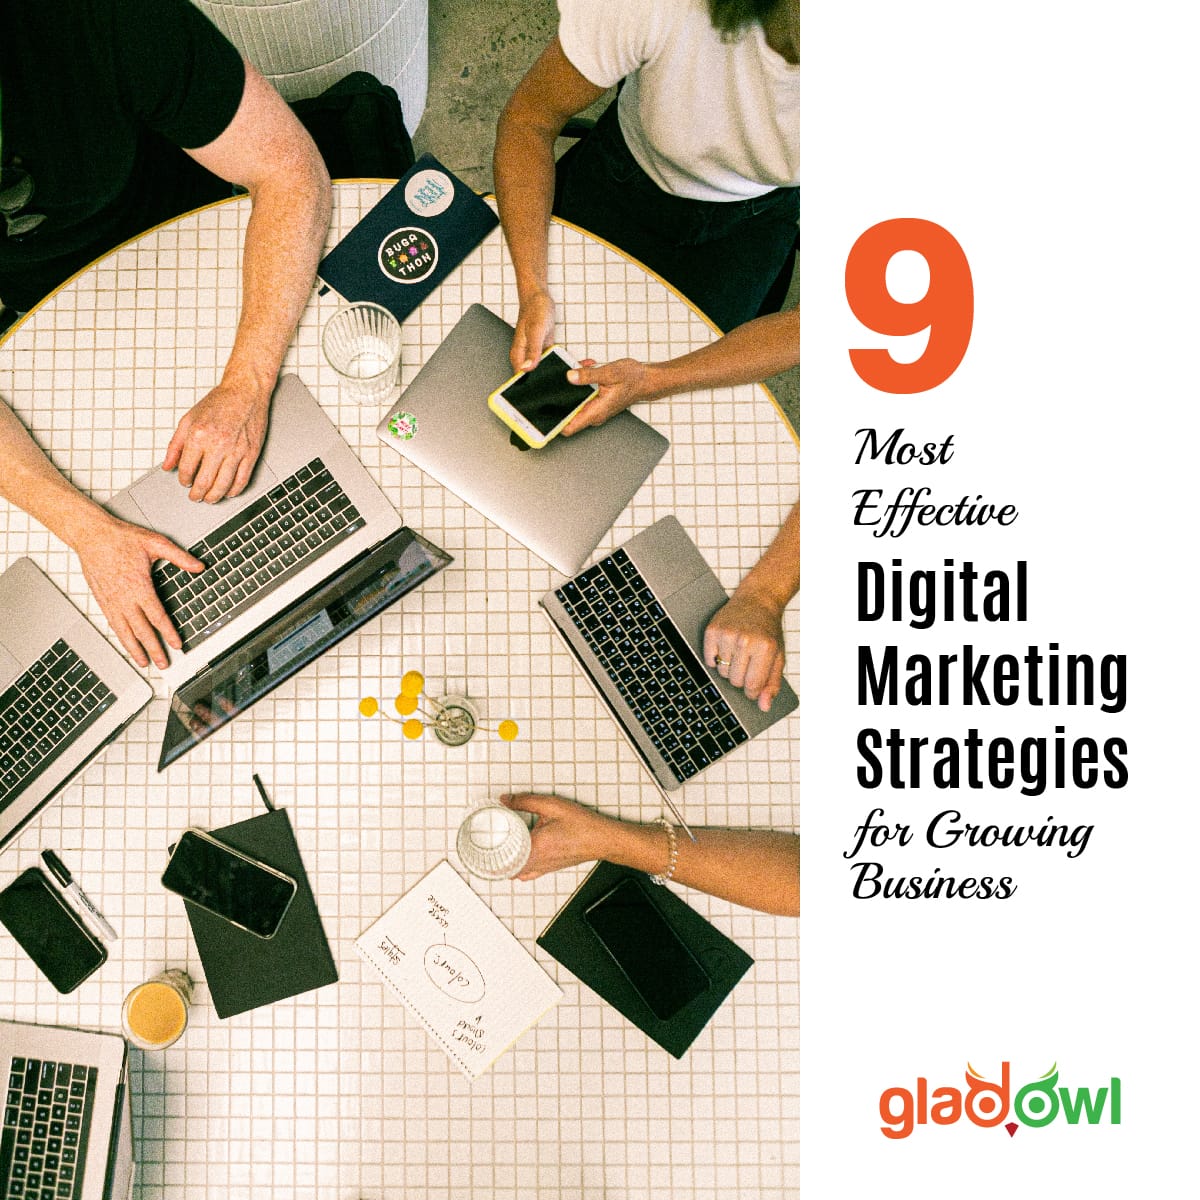 9 Most Effective Digital Marketing Strategies for Growing Business